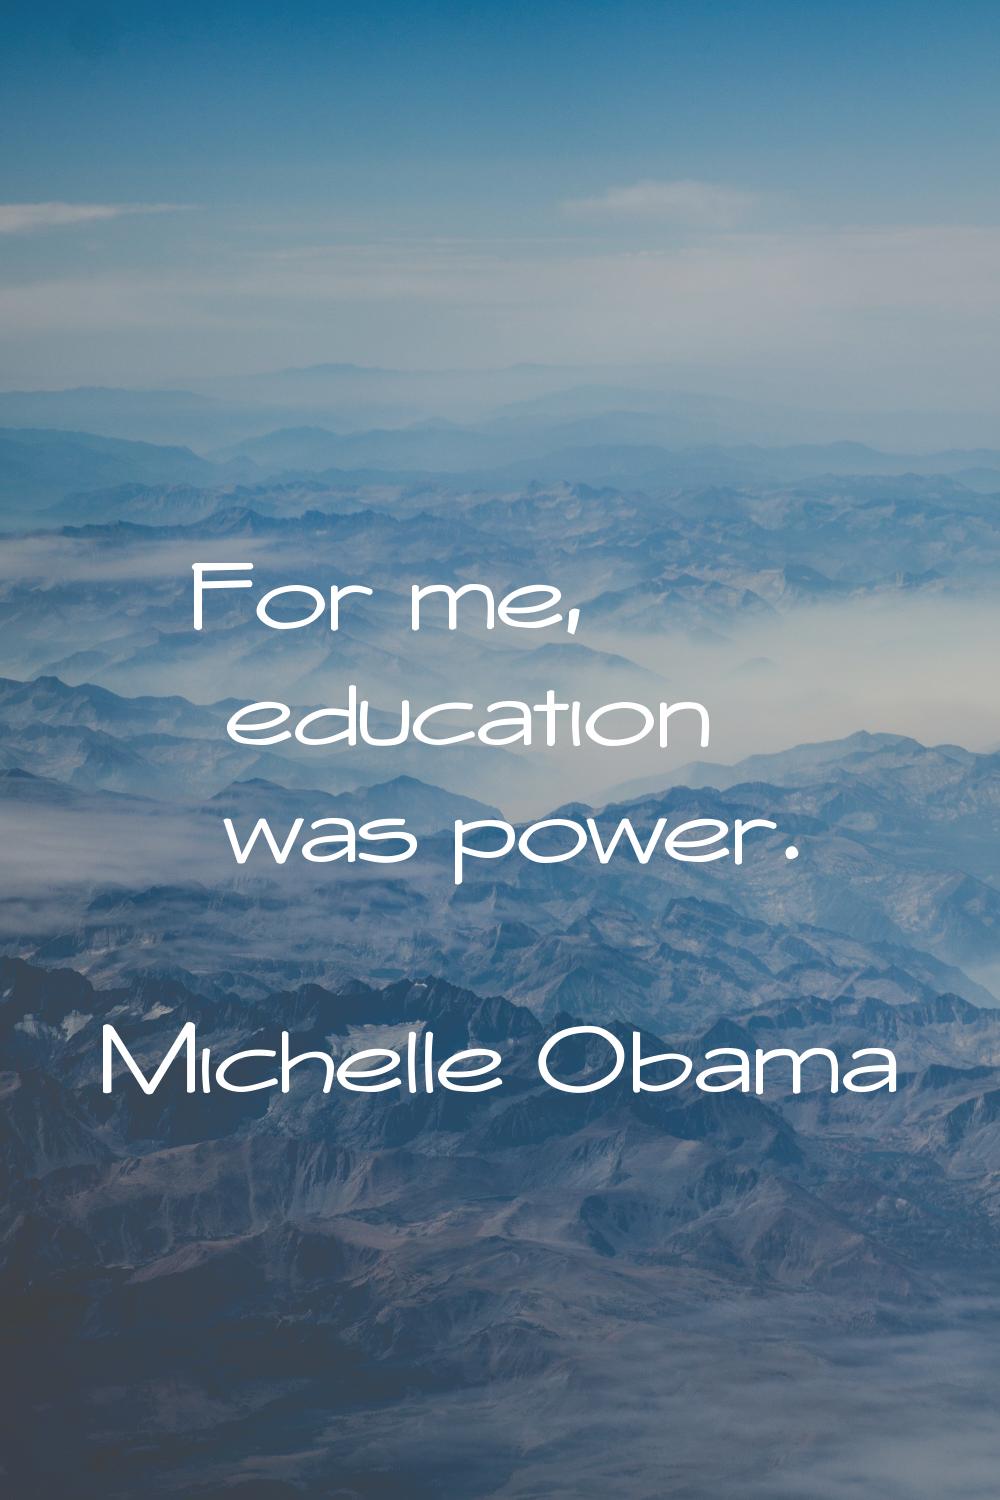 For me, education was power.